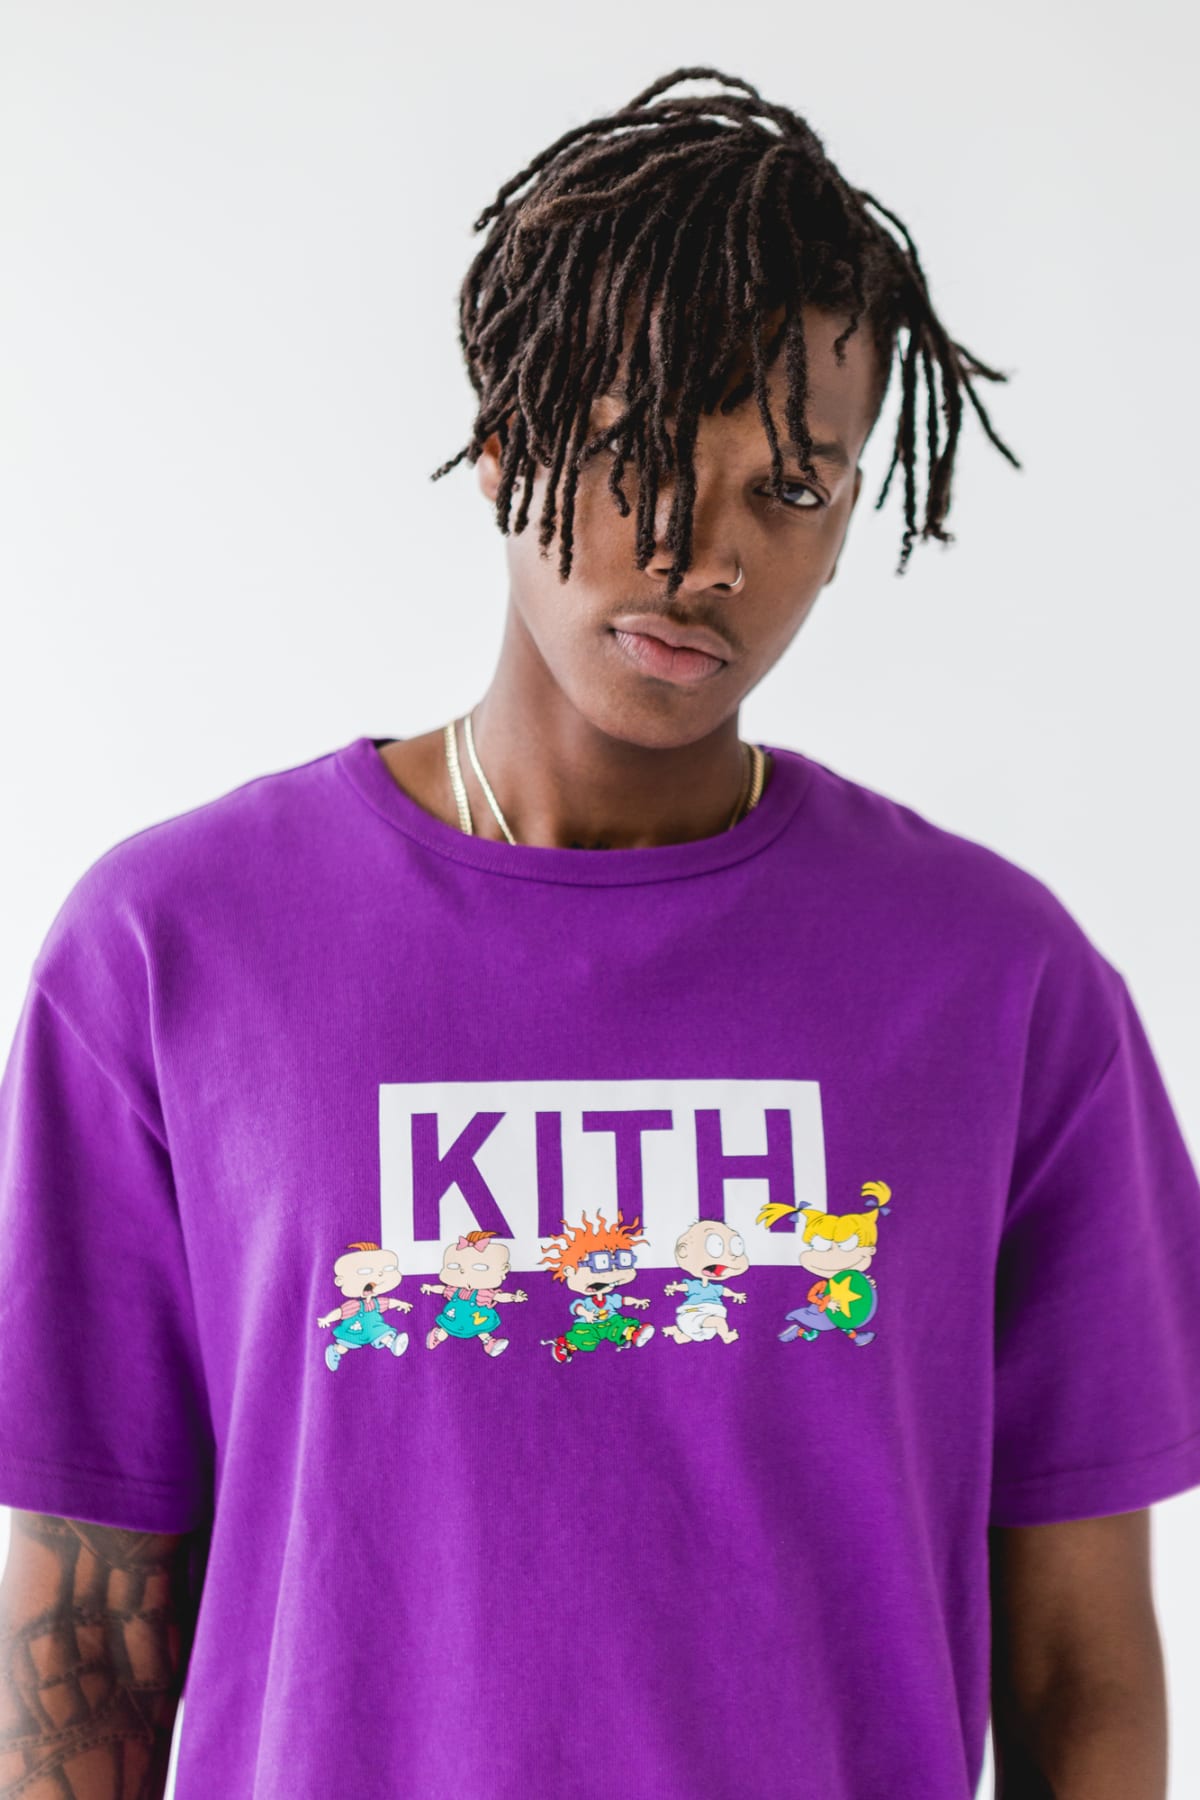 Kith and Nickelodeon Team Up for 'Rugrats' Clothing ... - 1200 x 1800 jpeg 154kB